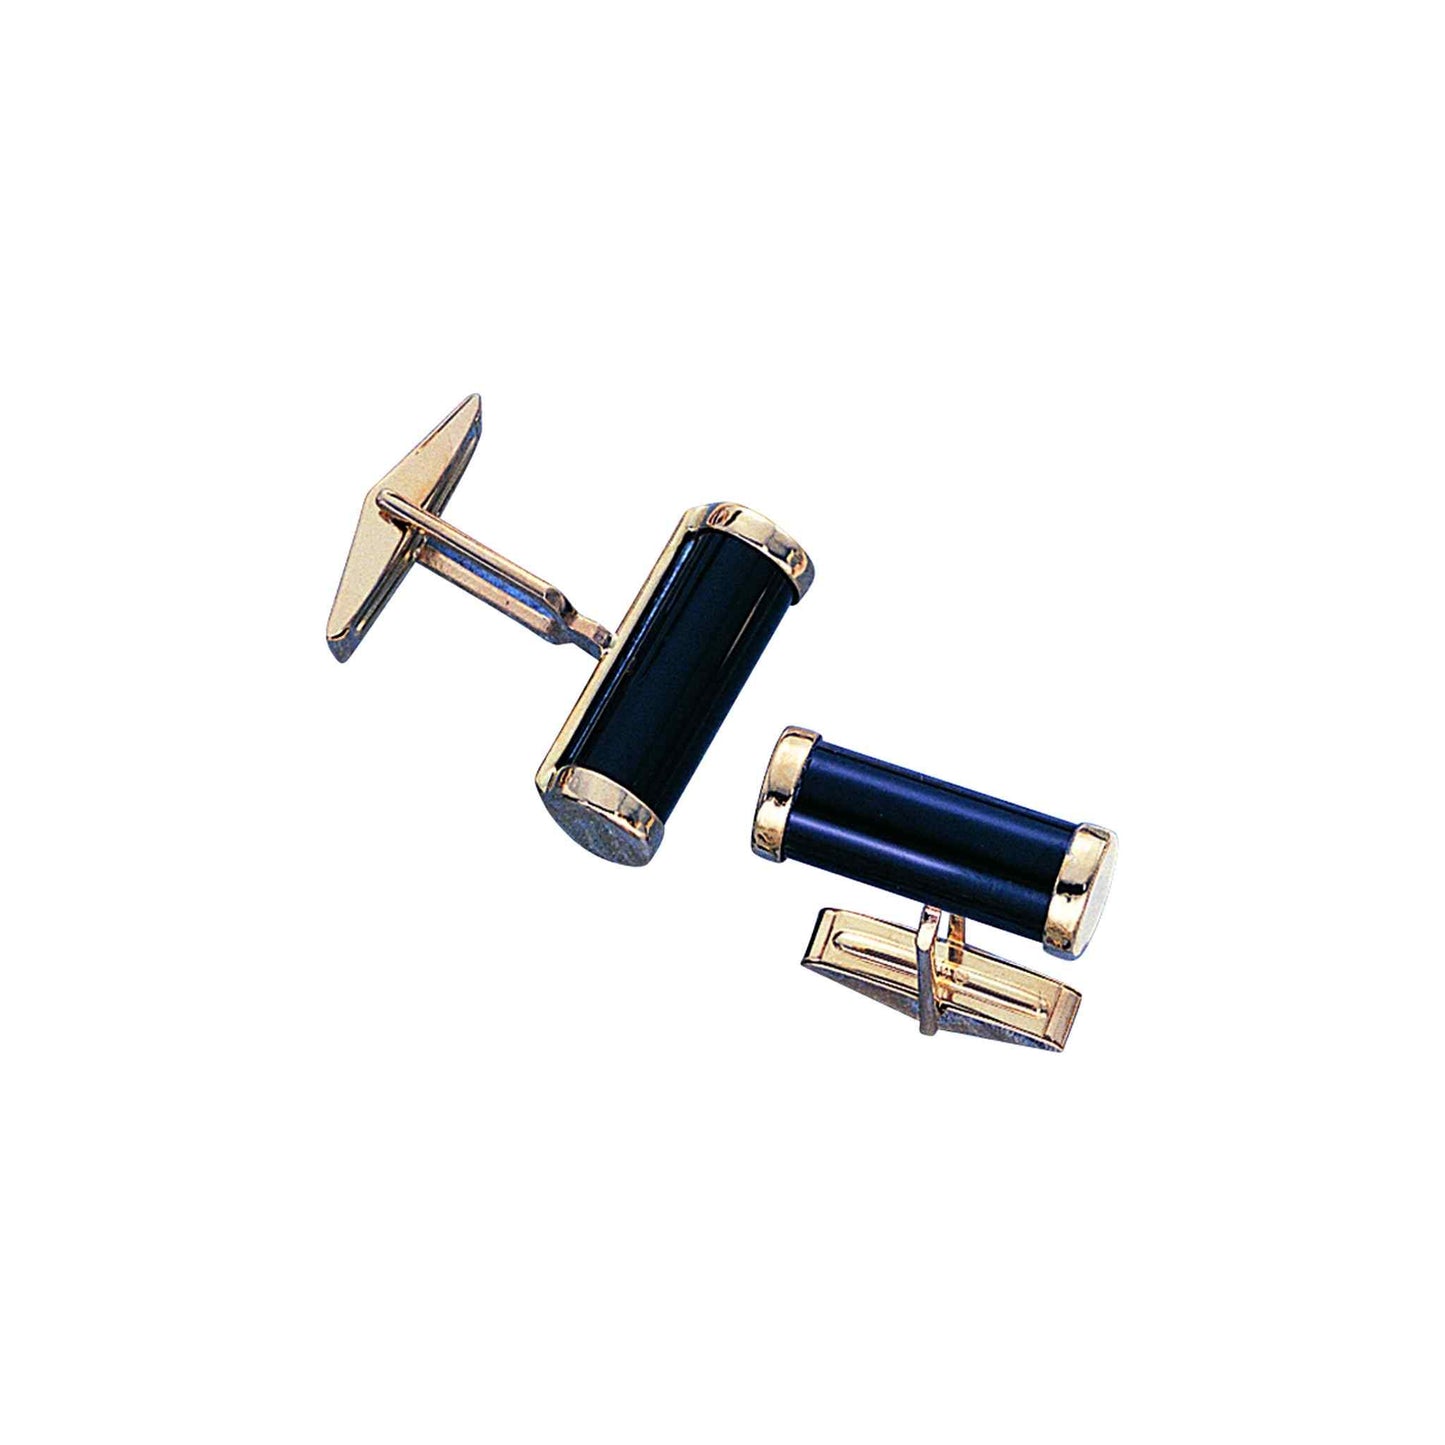 A 14k yellow gold onyx cylinder cufflinks displayed on a neutral white background.